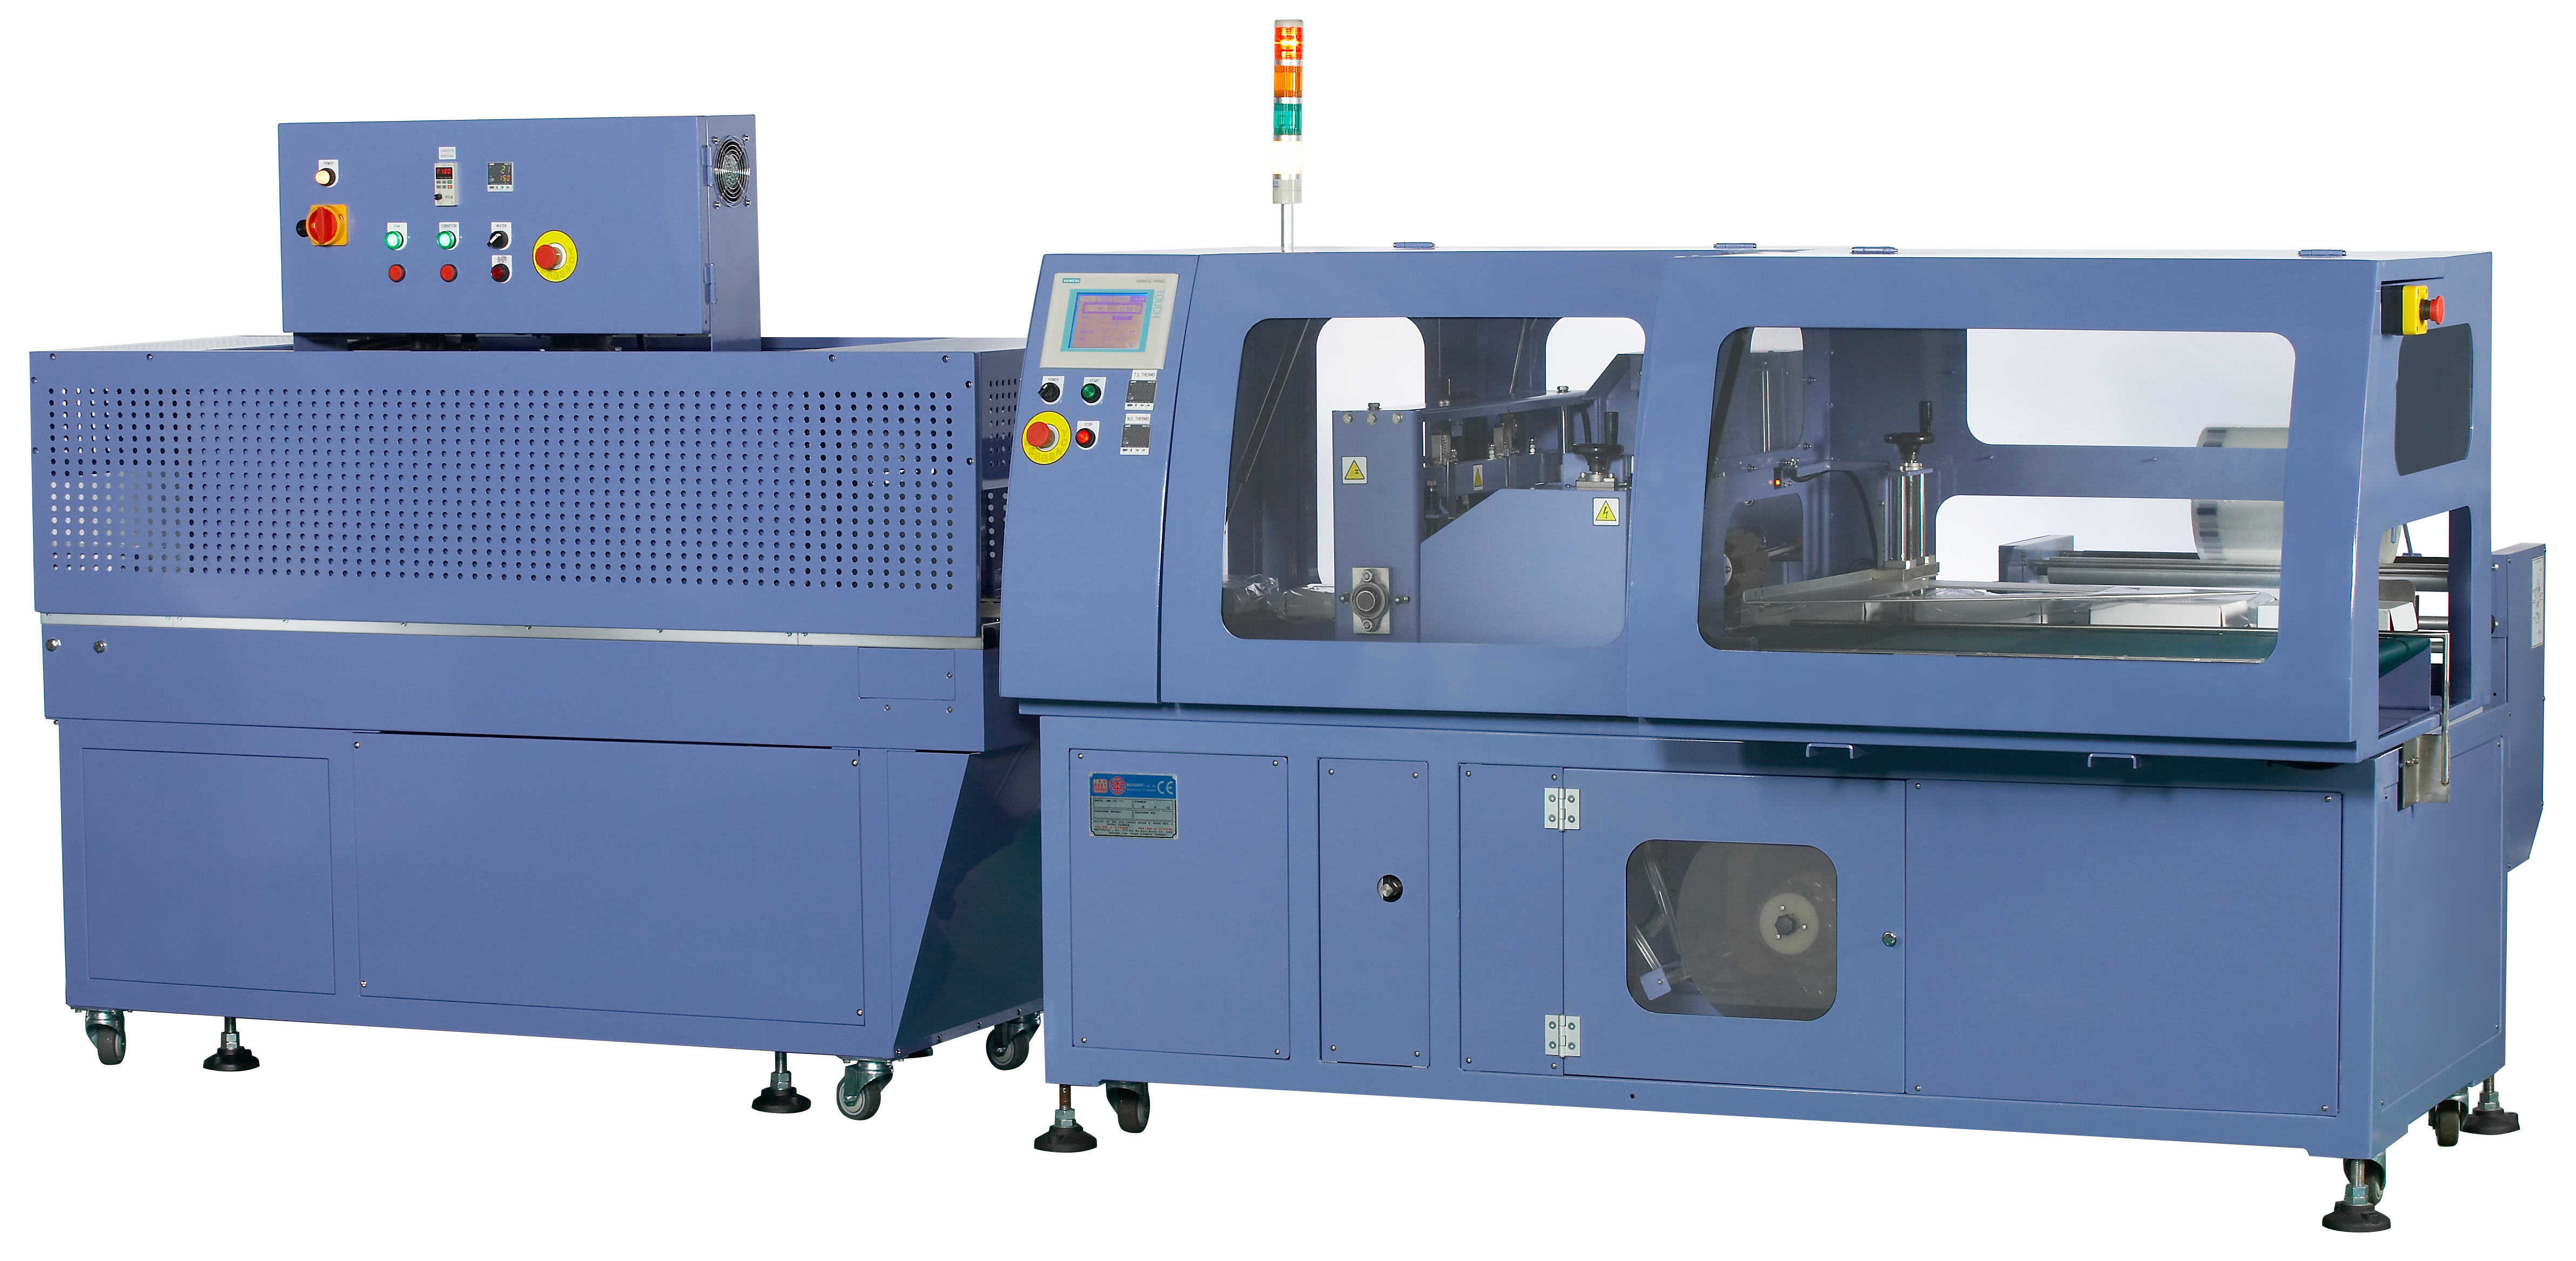 The auto Side-seal wrapping machine has been Benison's hot-seller among others since 2013.